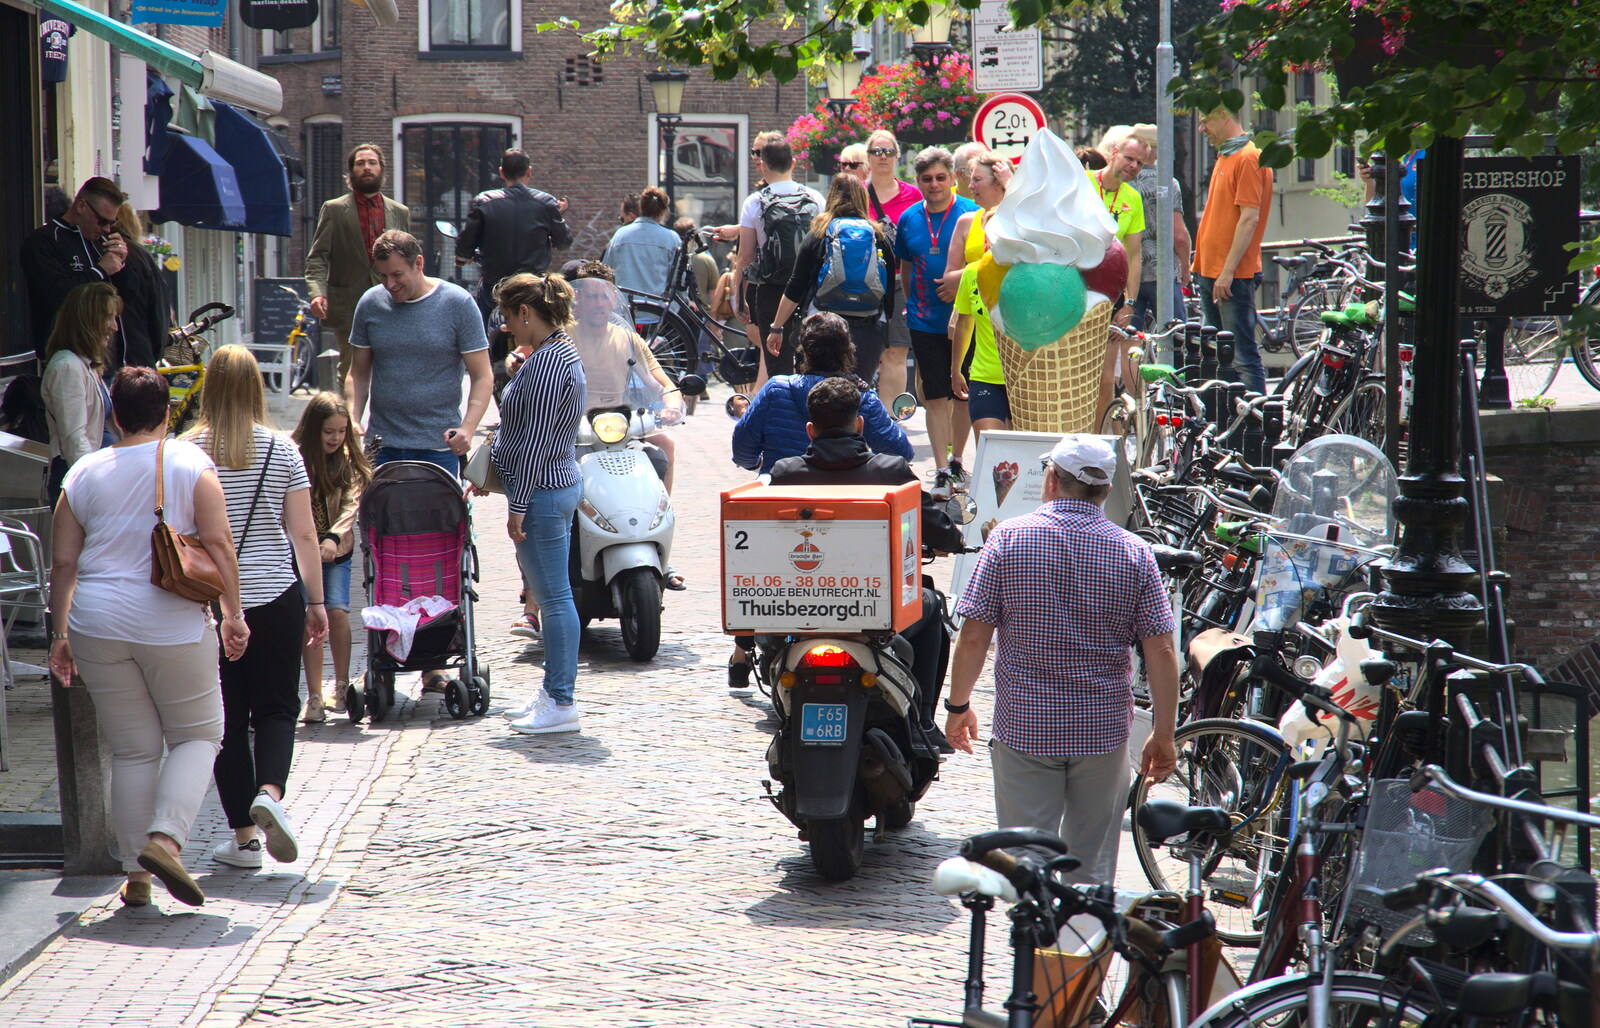 Hamish disappears into the crowds again from A Postcard from Utrecht, Nederlands - 10th June 2018